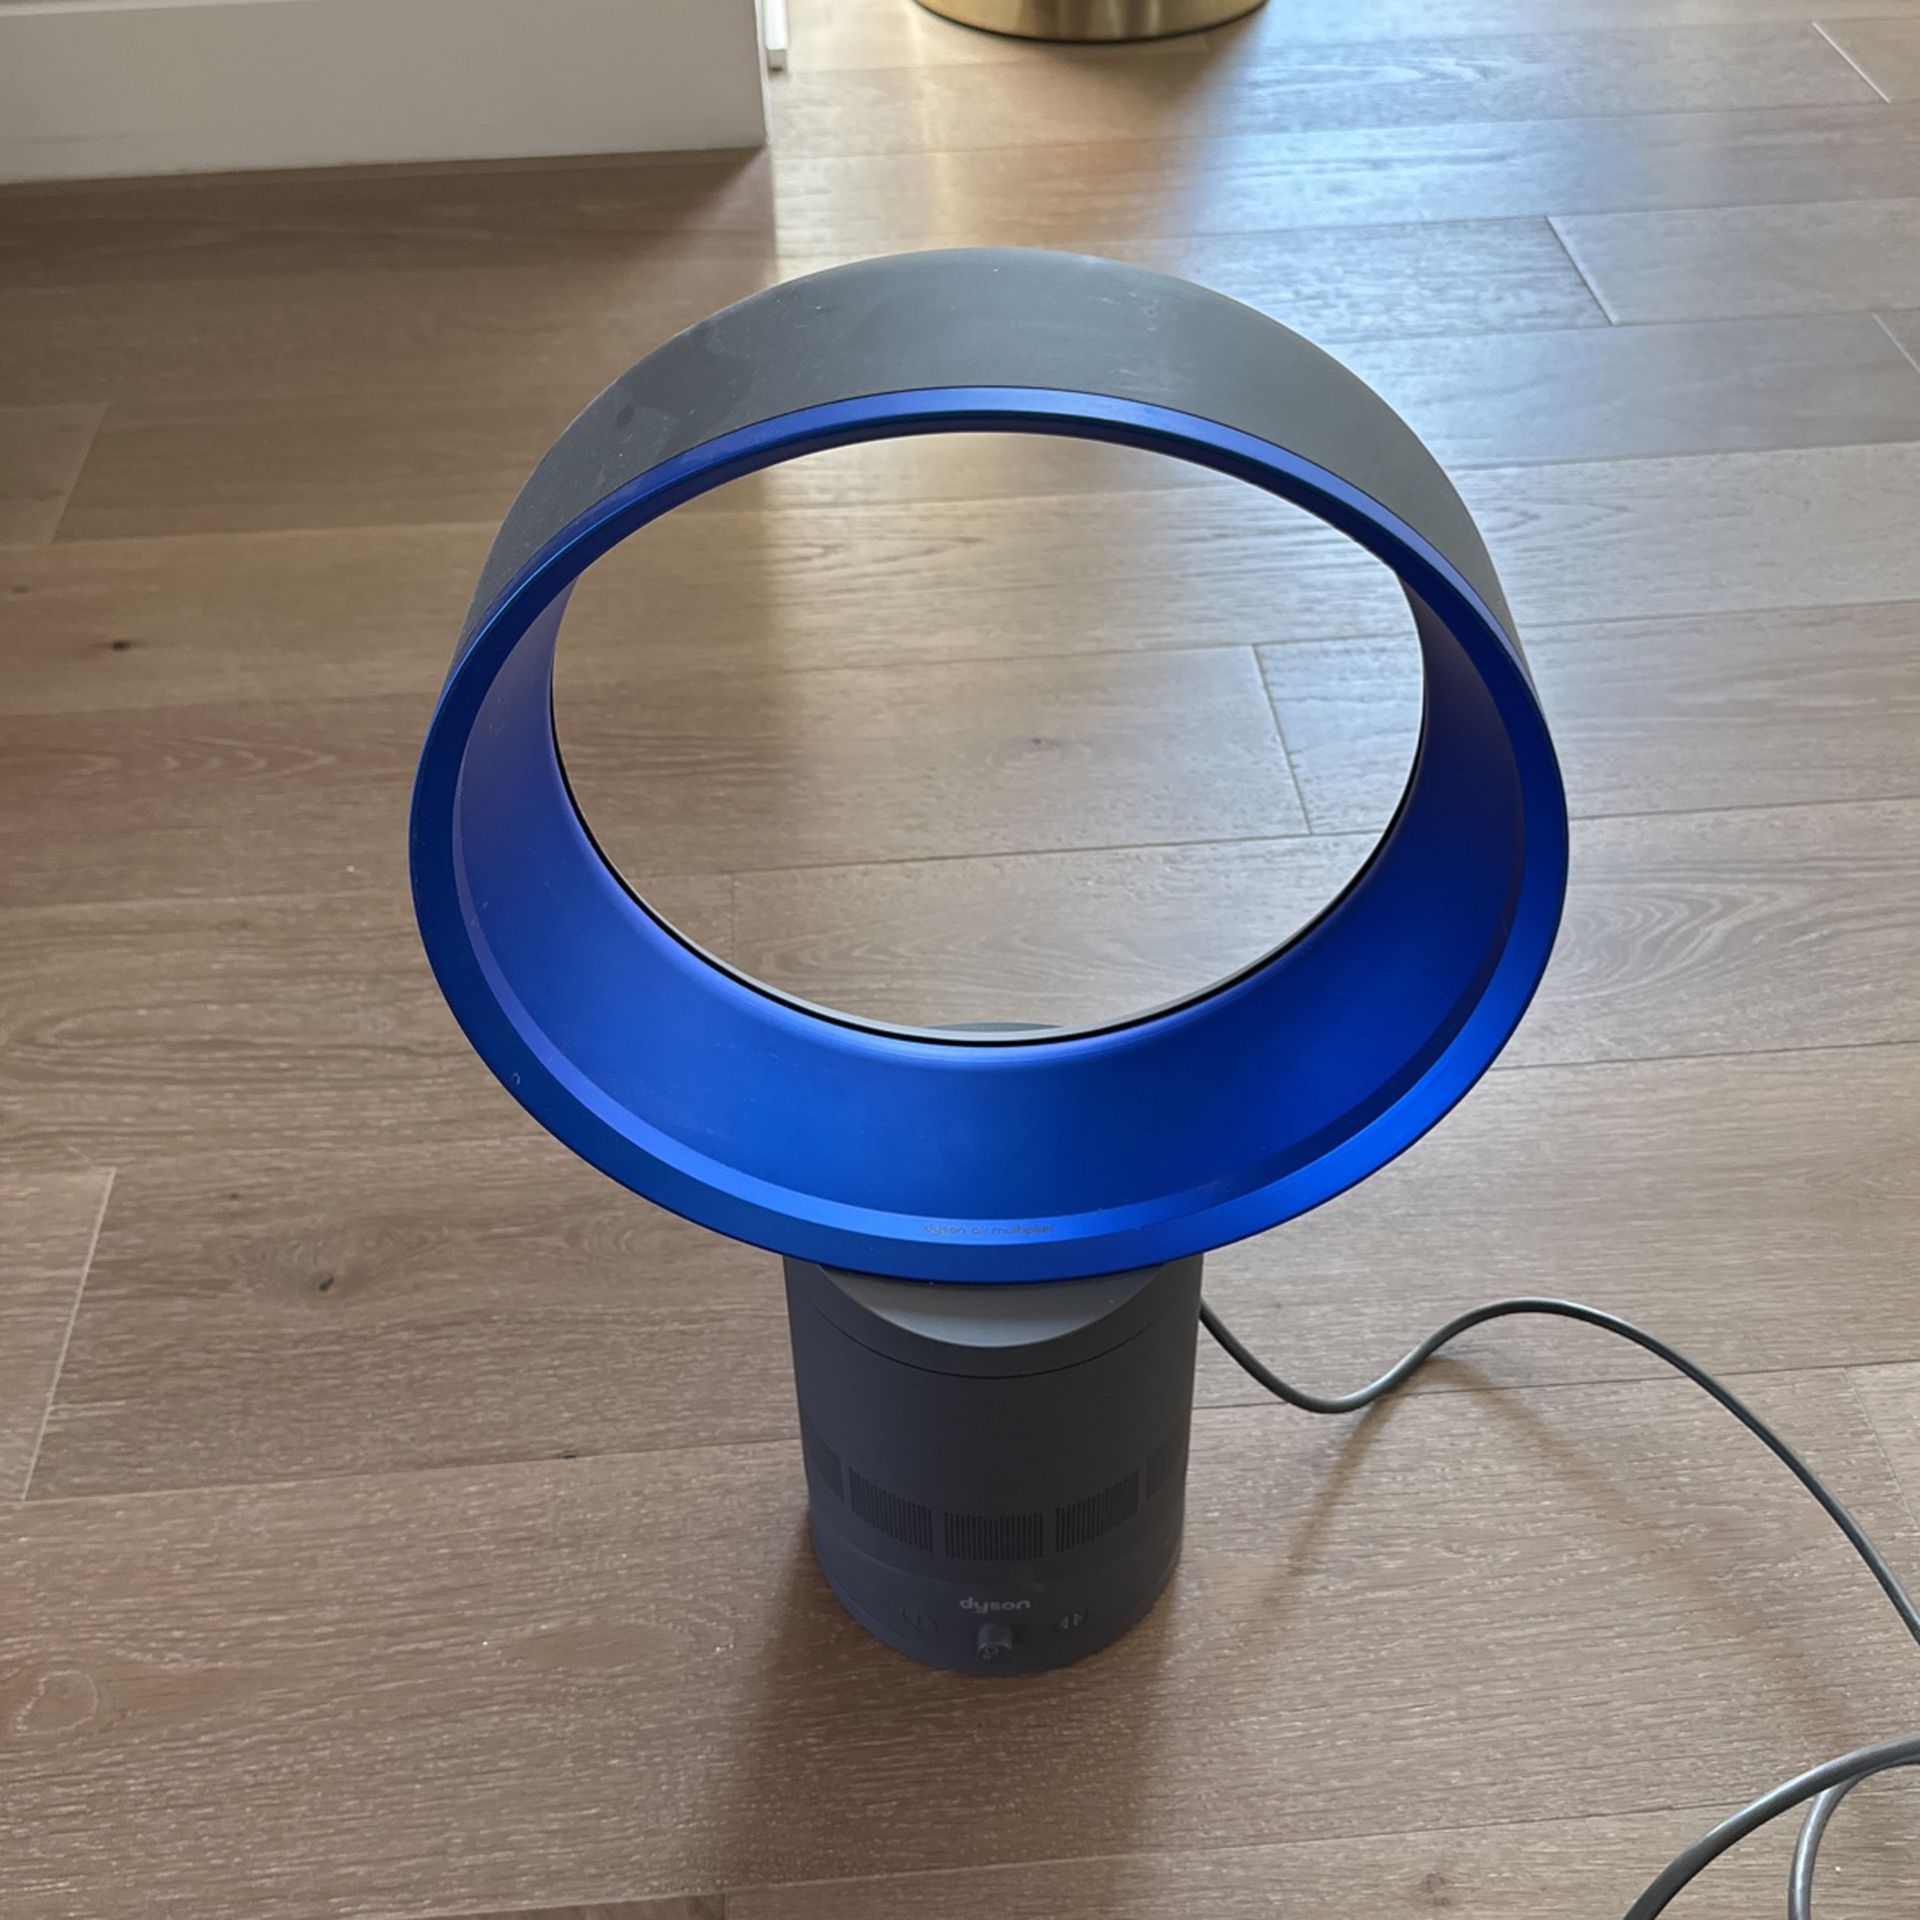 Dyson Rotating Fan for Sale in Orlando, OfferUp